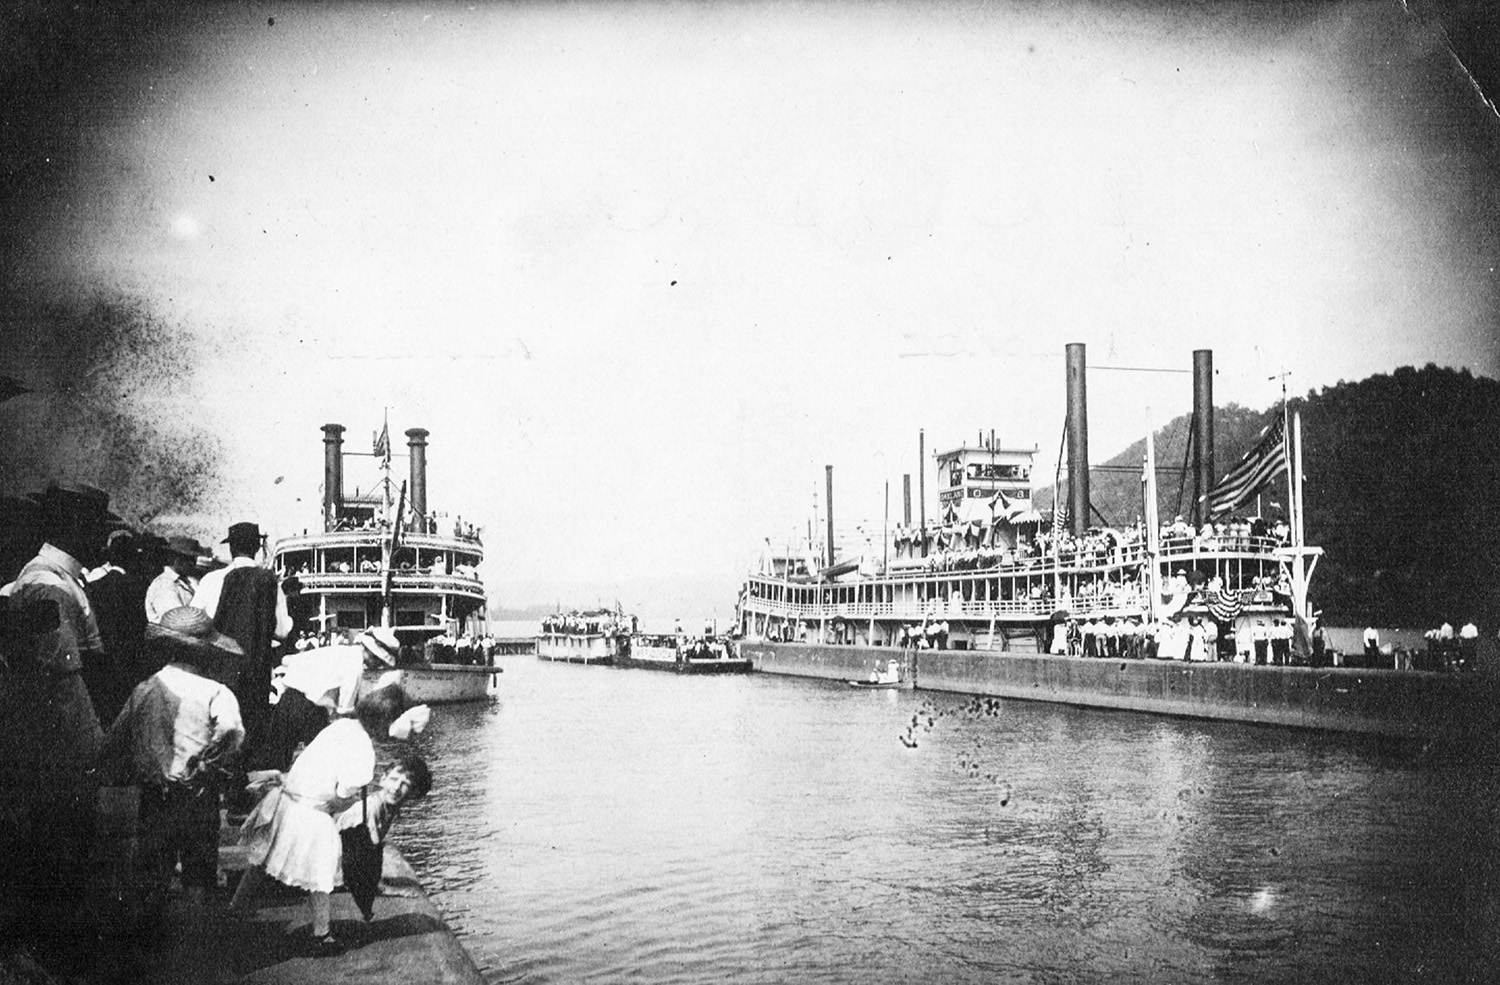 The towboat Oakland at the dedication of Ohio River Lock and Dam 11 on July 6, 1911. (Keith Norrington collection)